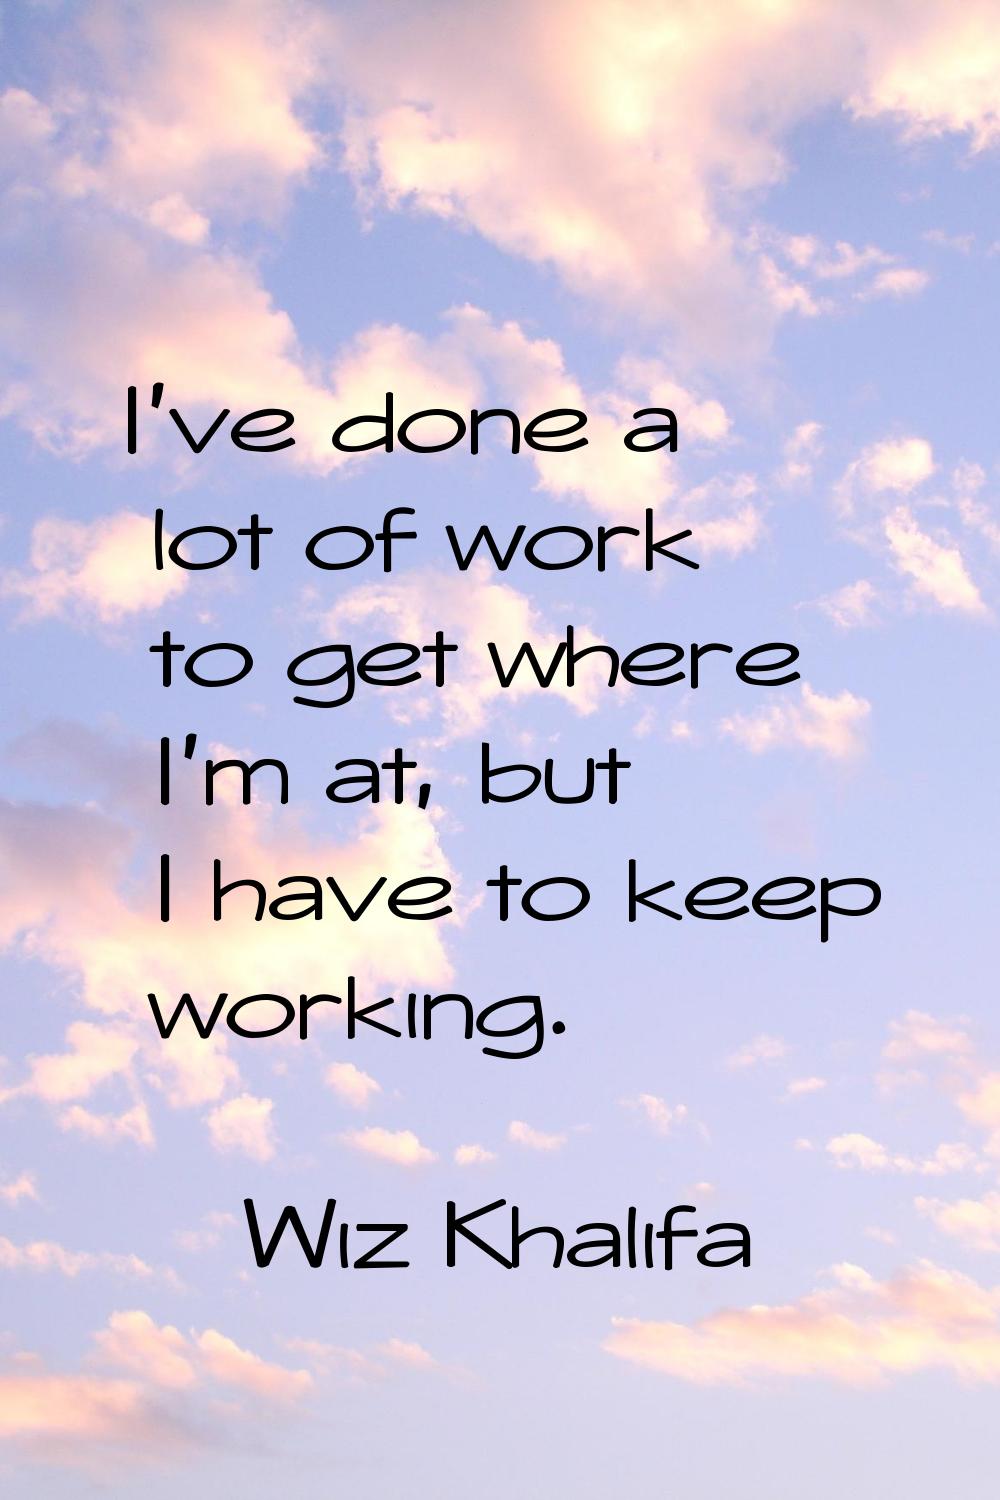 I've done a lot of work to get where I'm at, but I have to keep working.